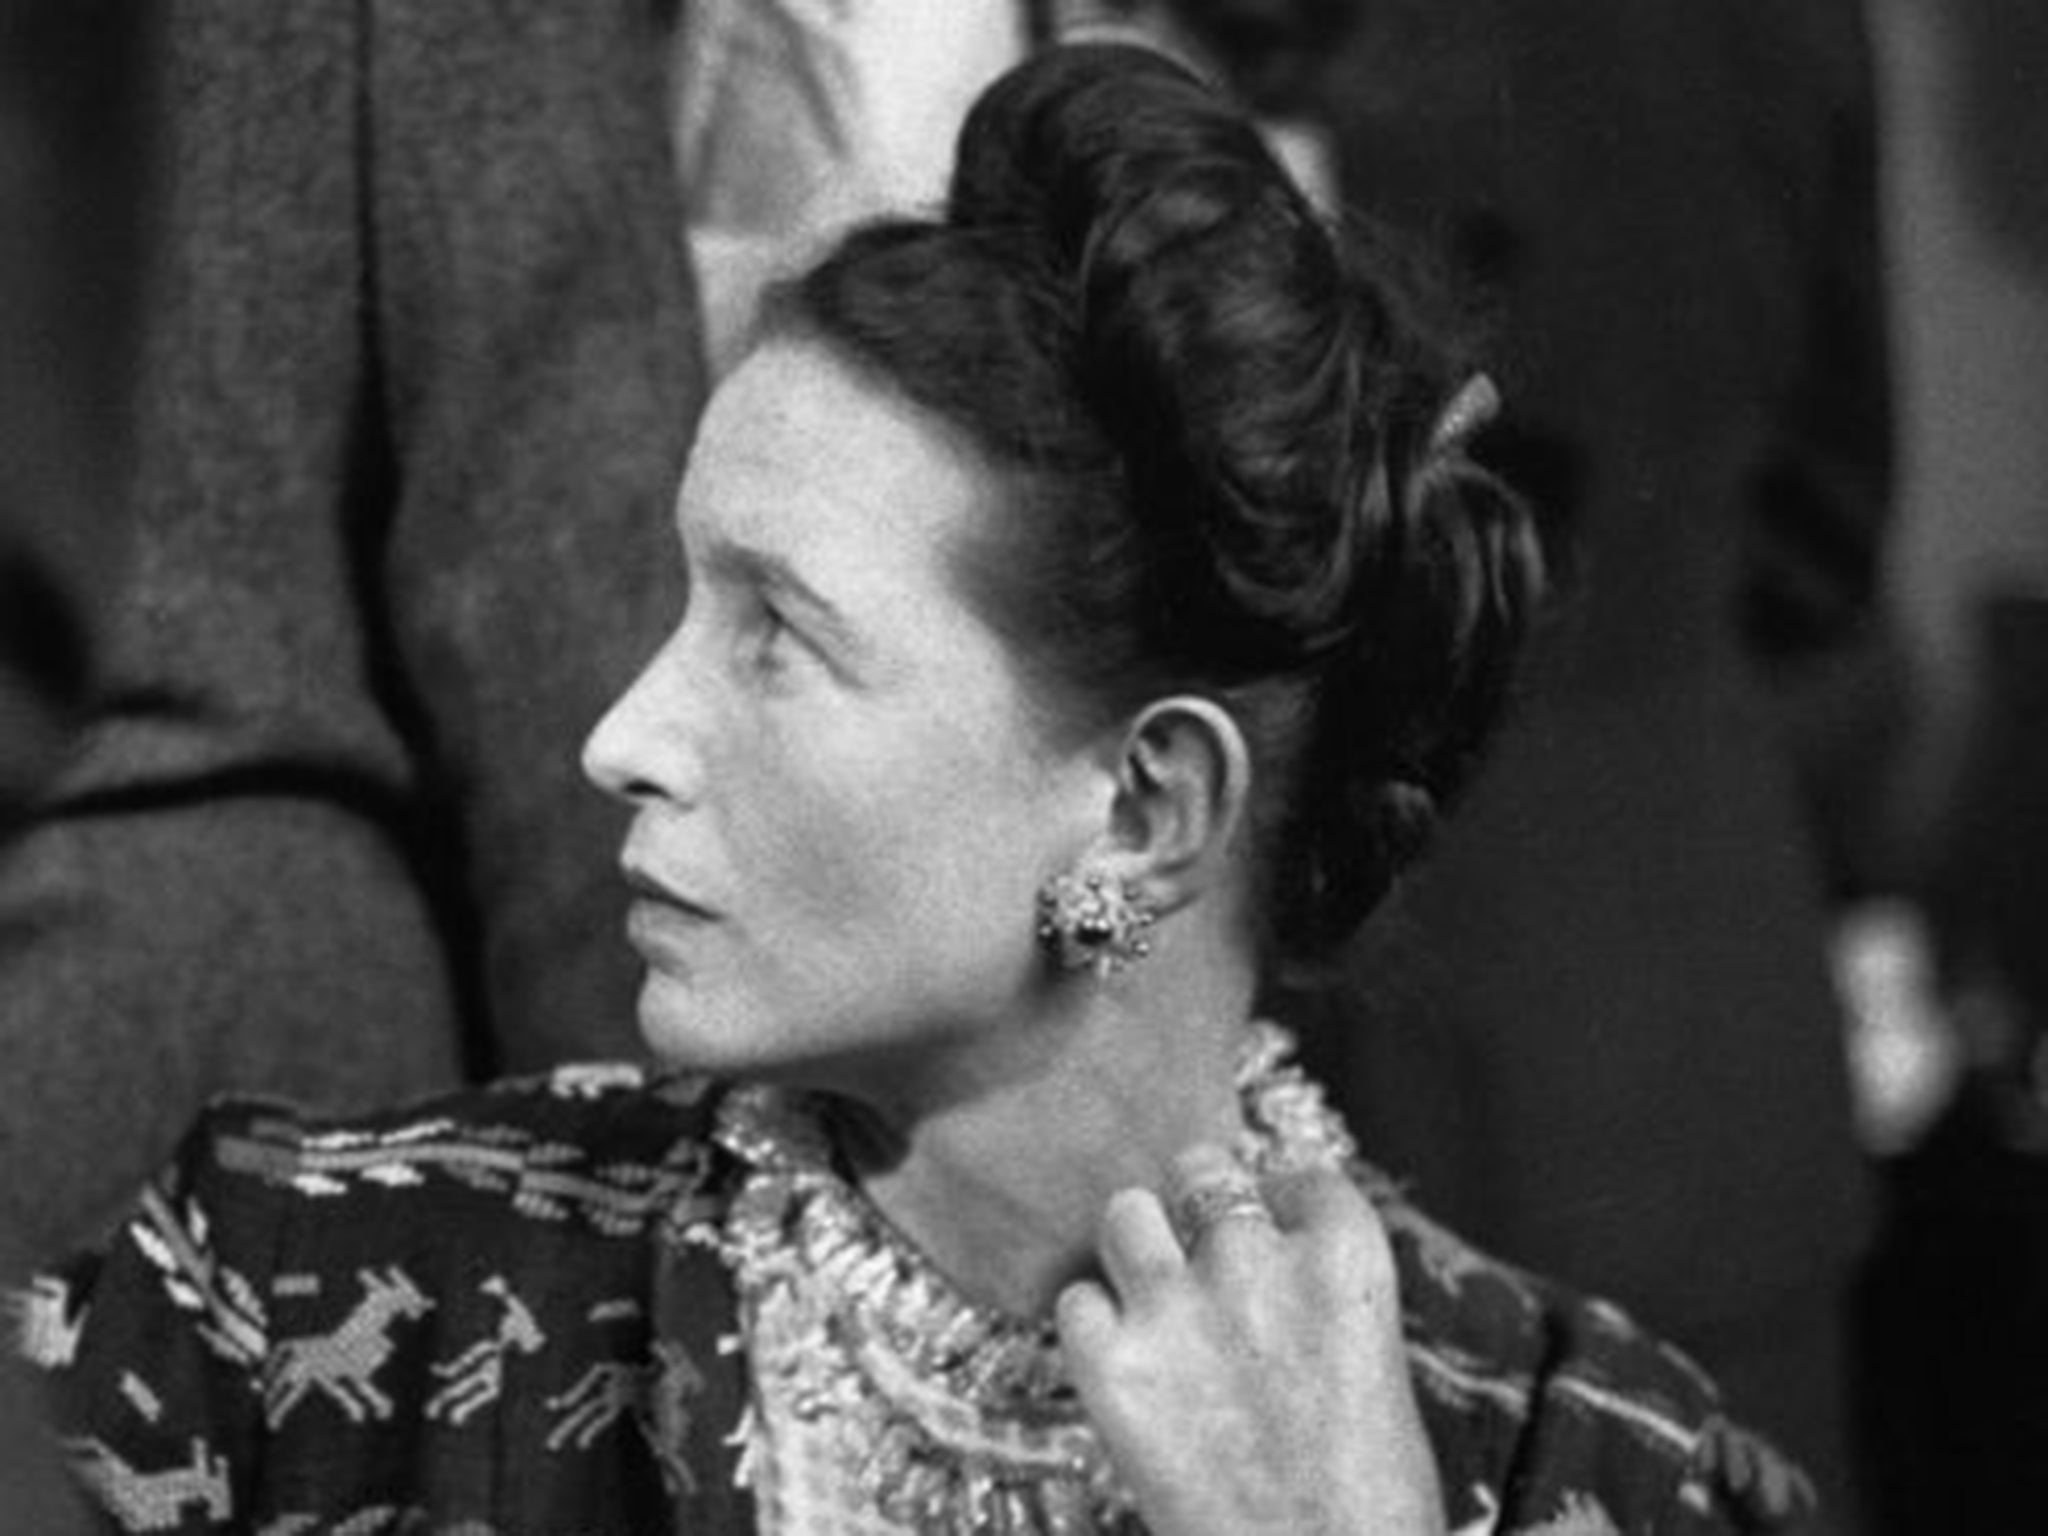 Simone de Beauvoir was one of the most important cultural historians of the twentieth century